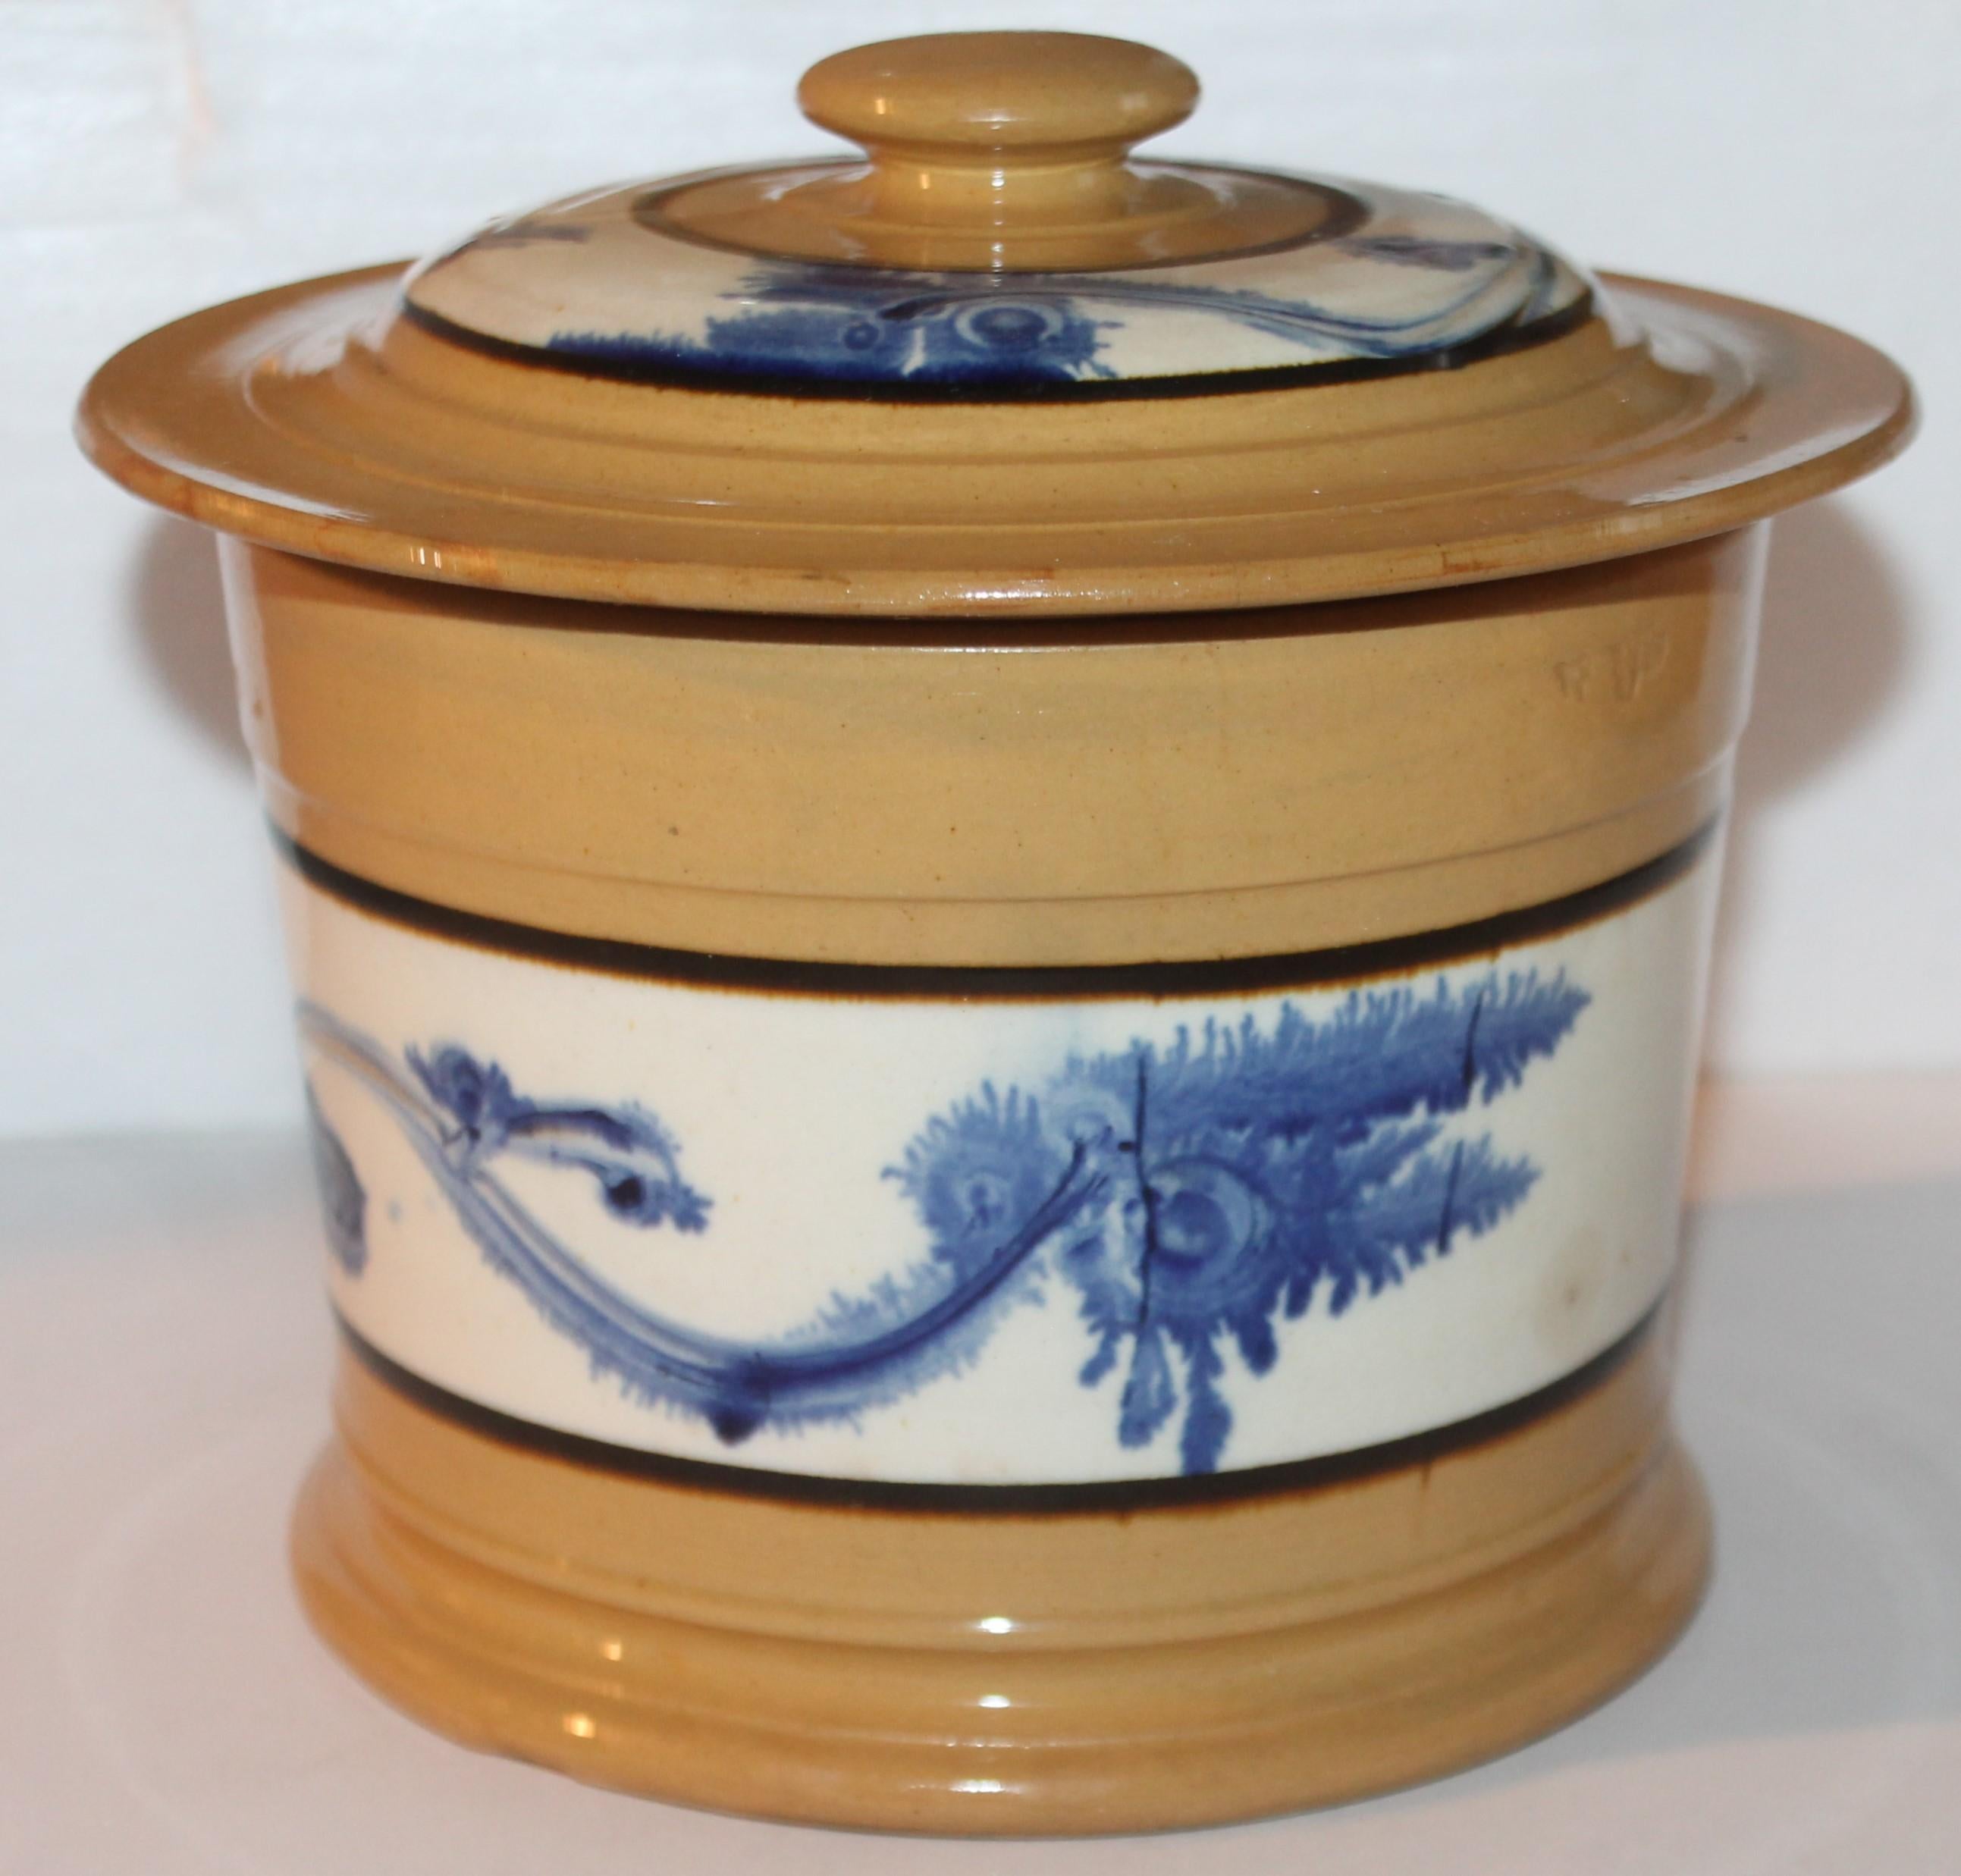 This fine mocha seaweed yellow ware butter tub is in fine condition and has the original lid.